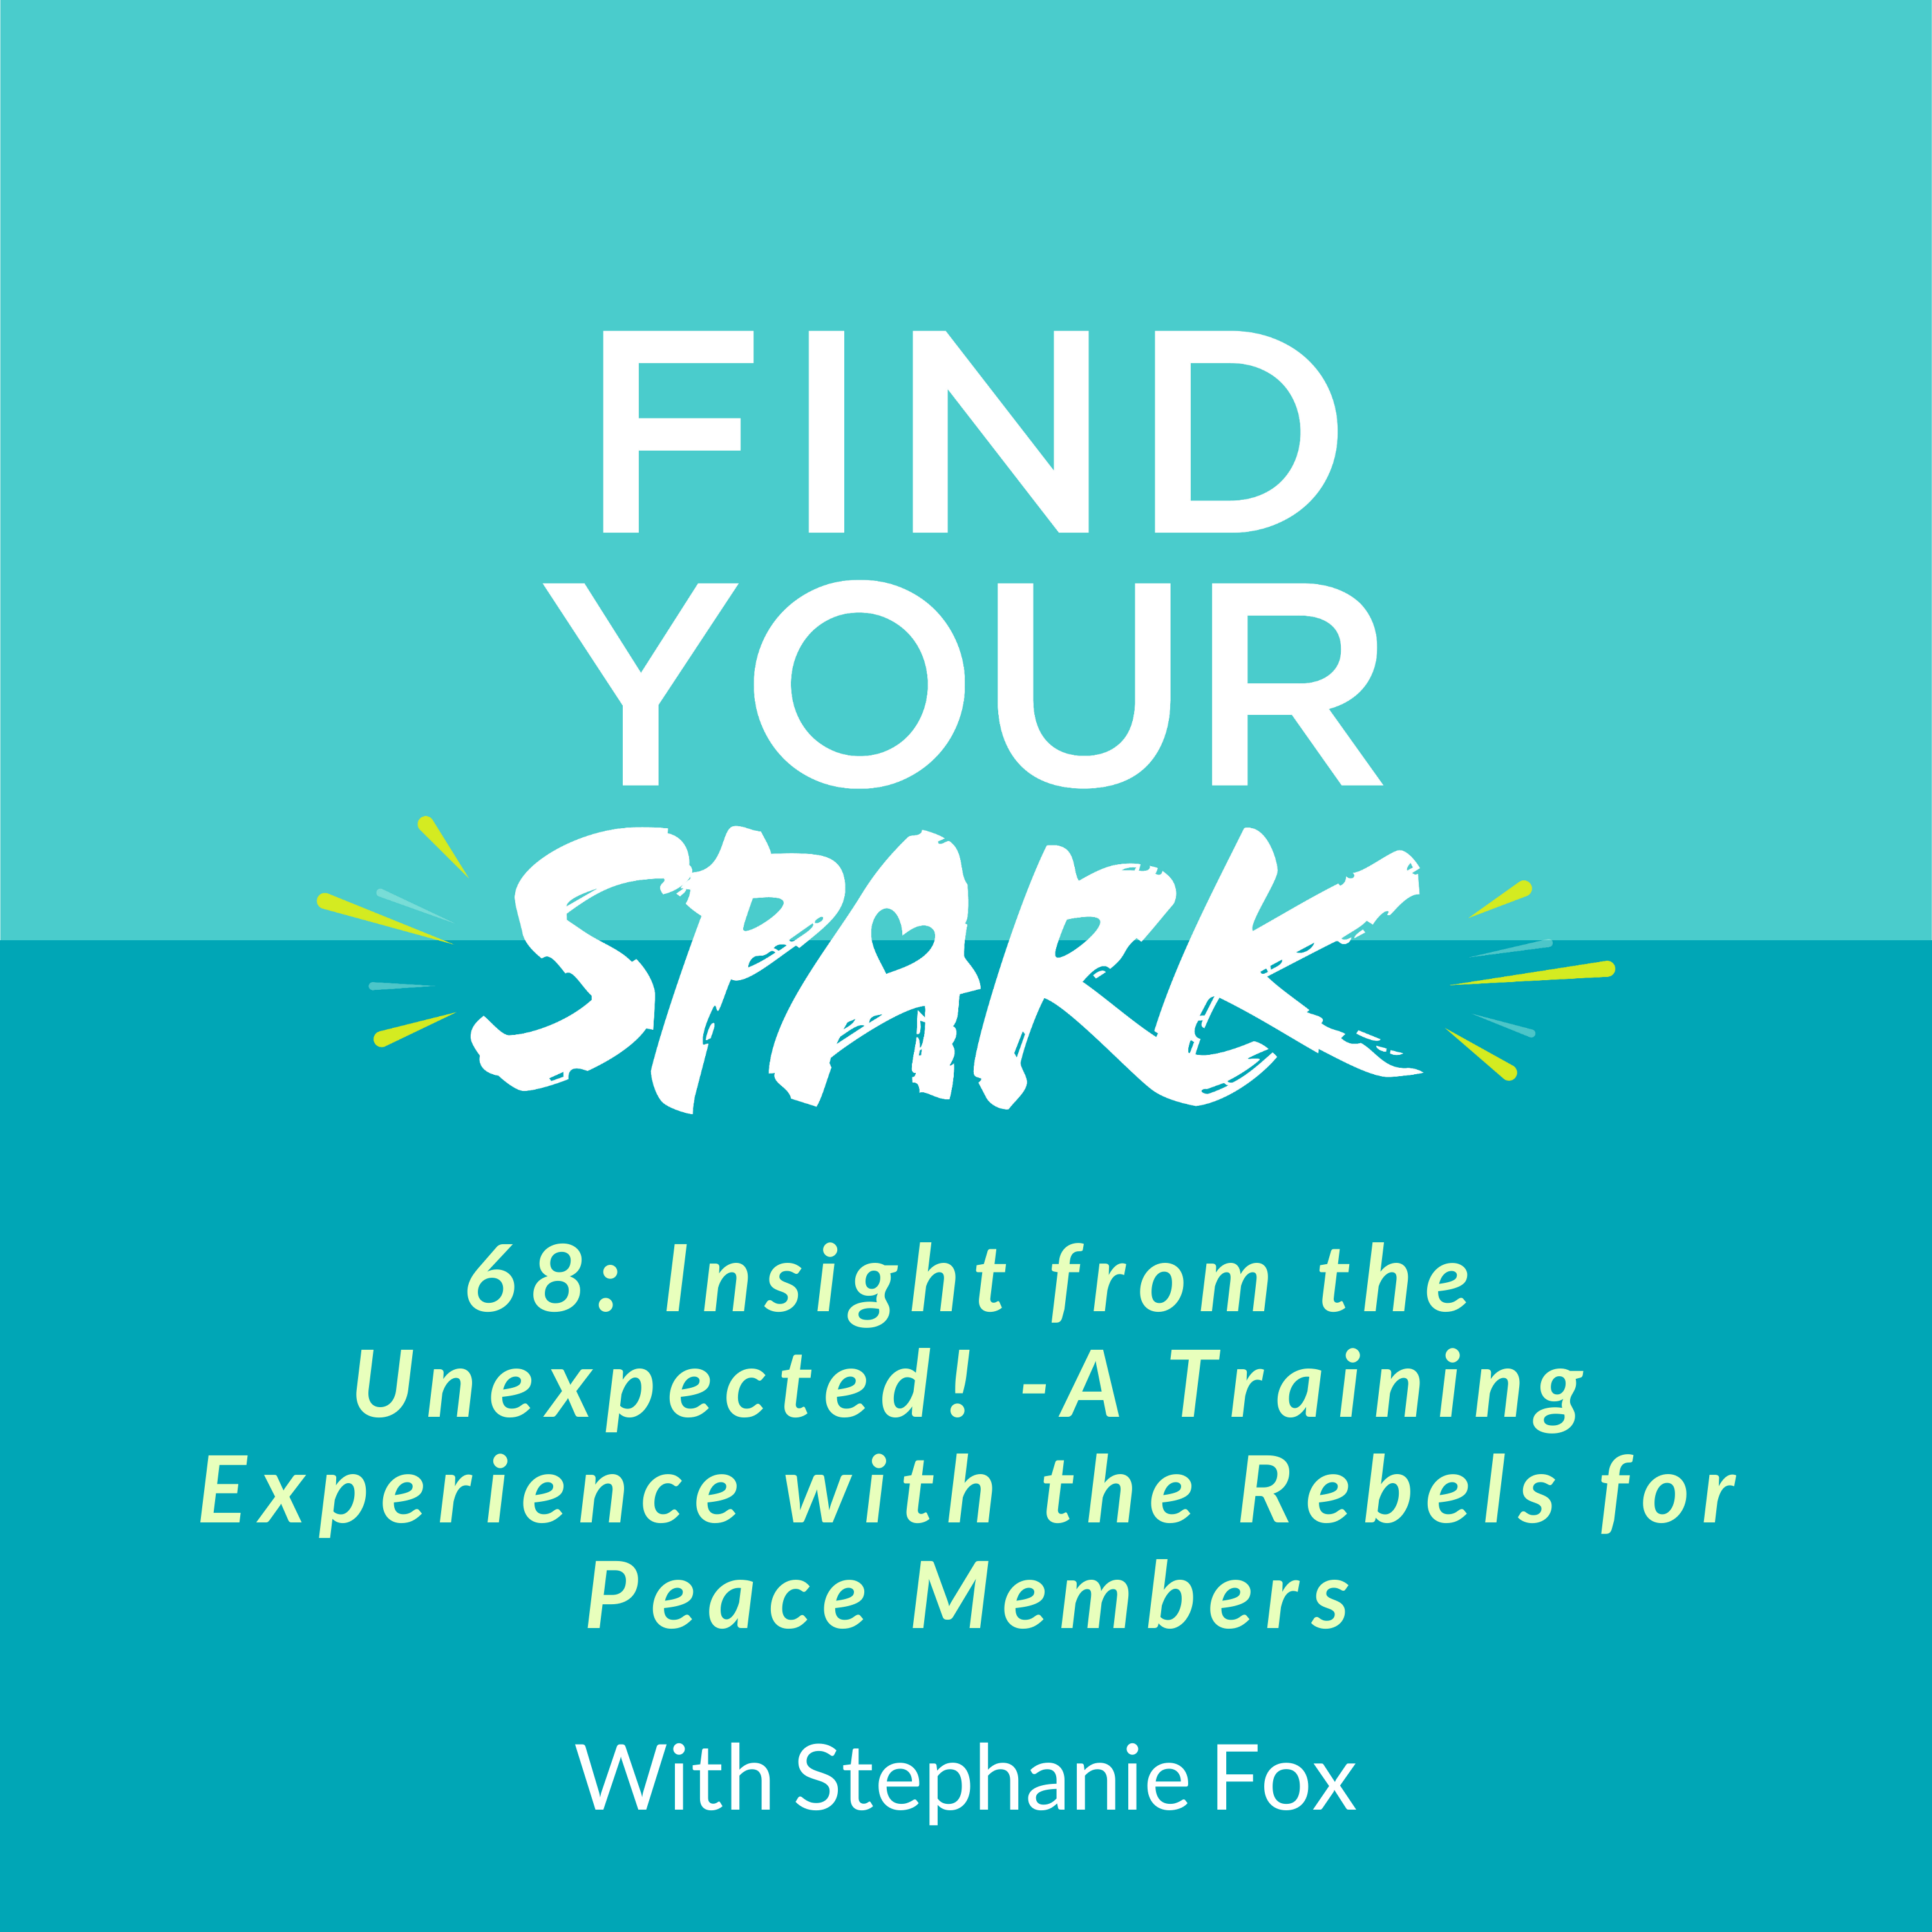 68: Insight from the Unexpected! - A Training Experience with the Rebels for Peace Members